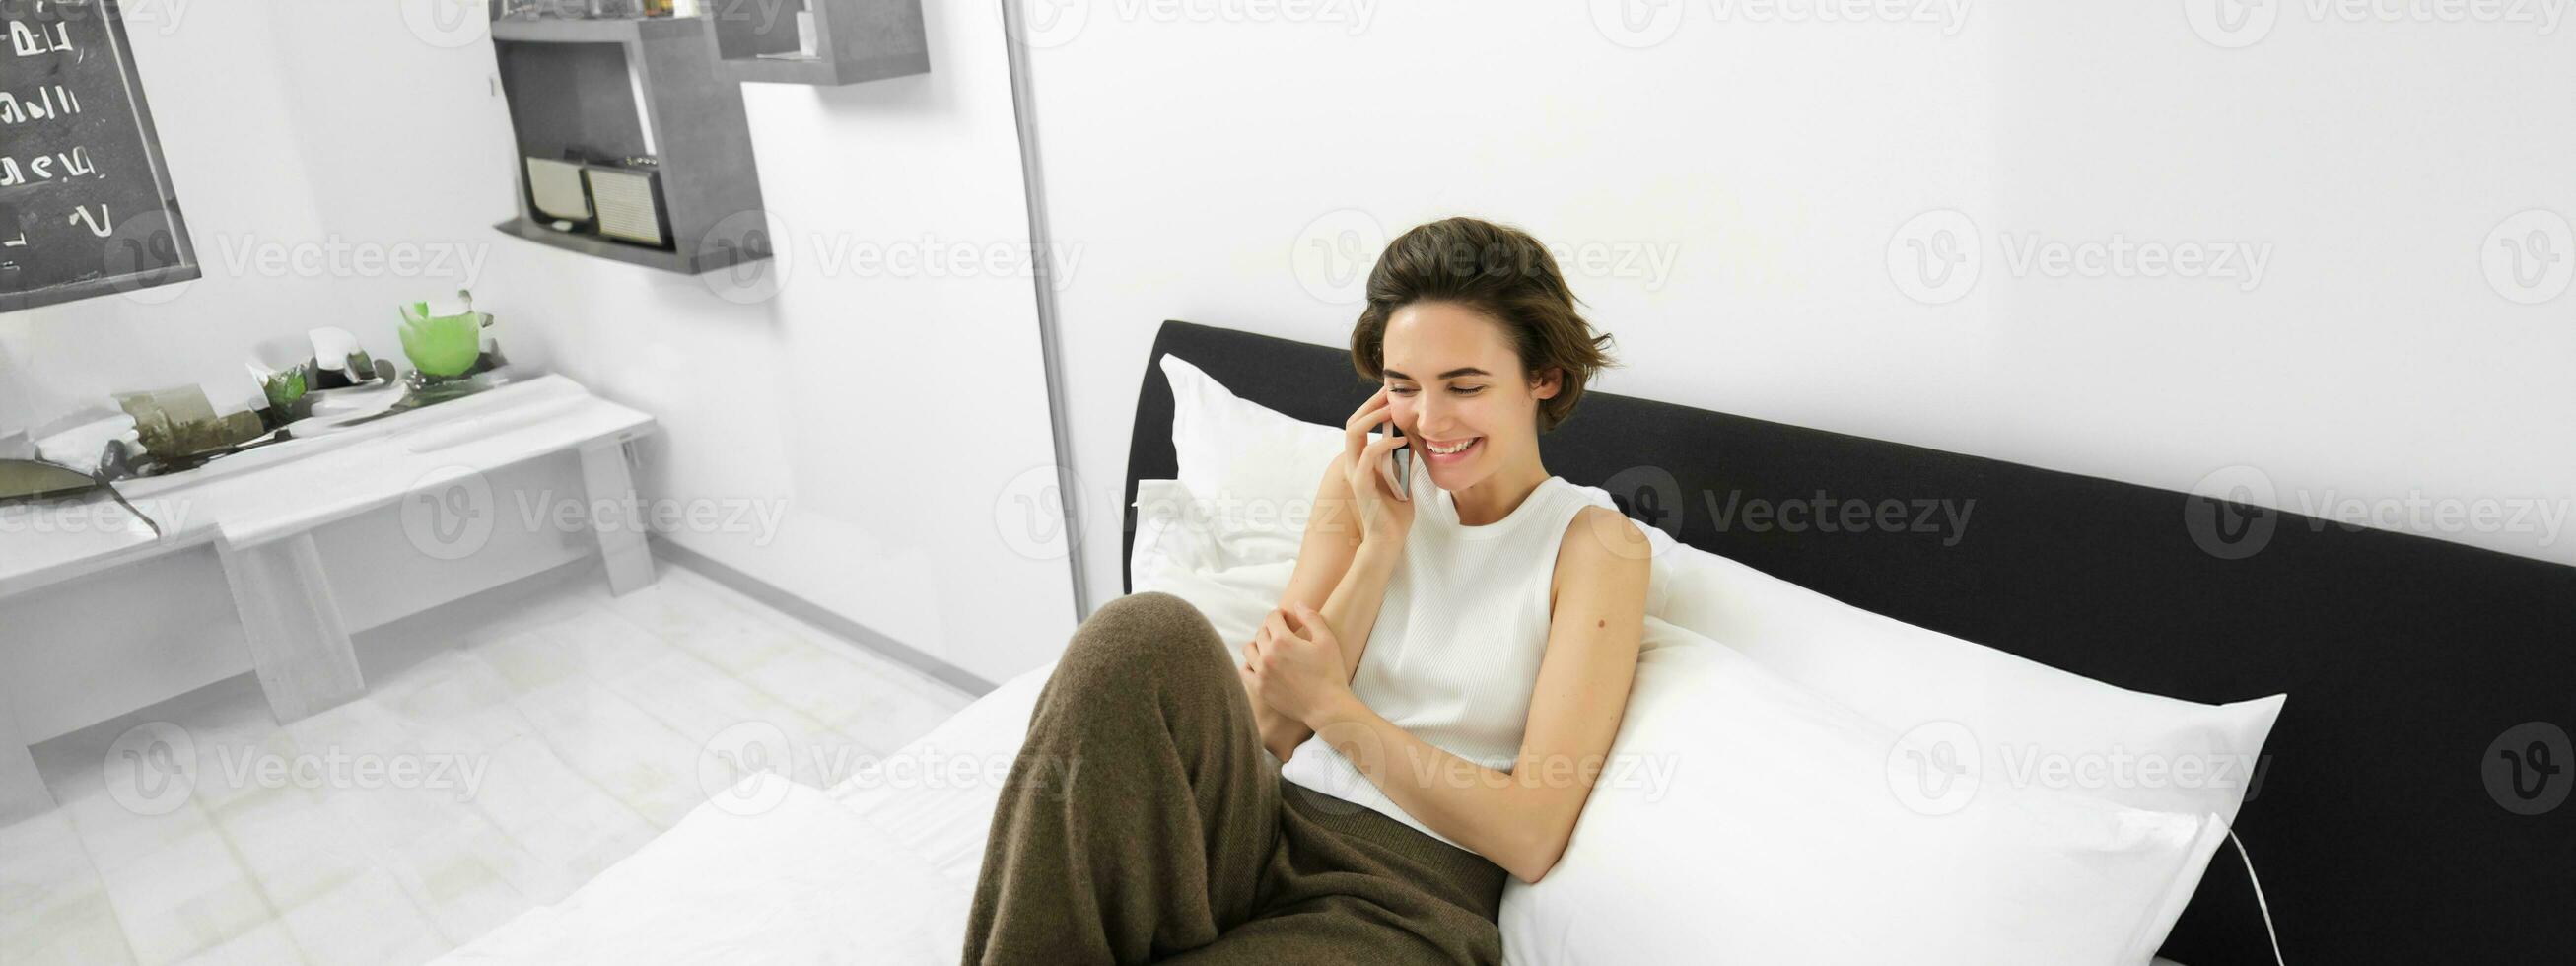 Beautiful young modern woman talking to friend, lying in bed and calling someone on phone, resting at home, chatting photo